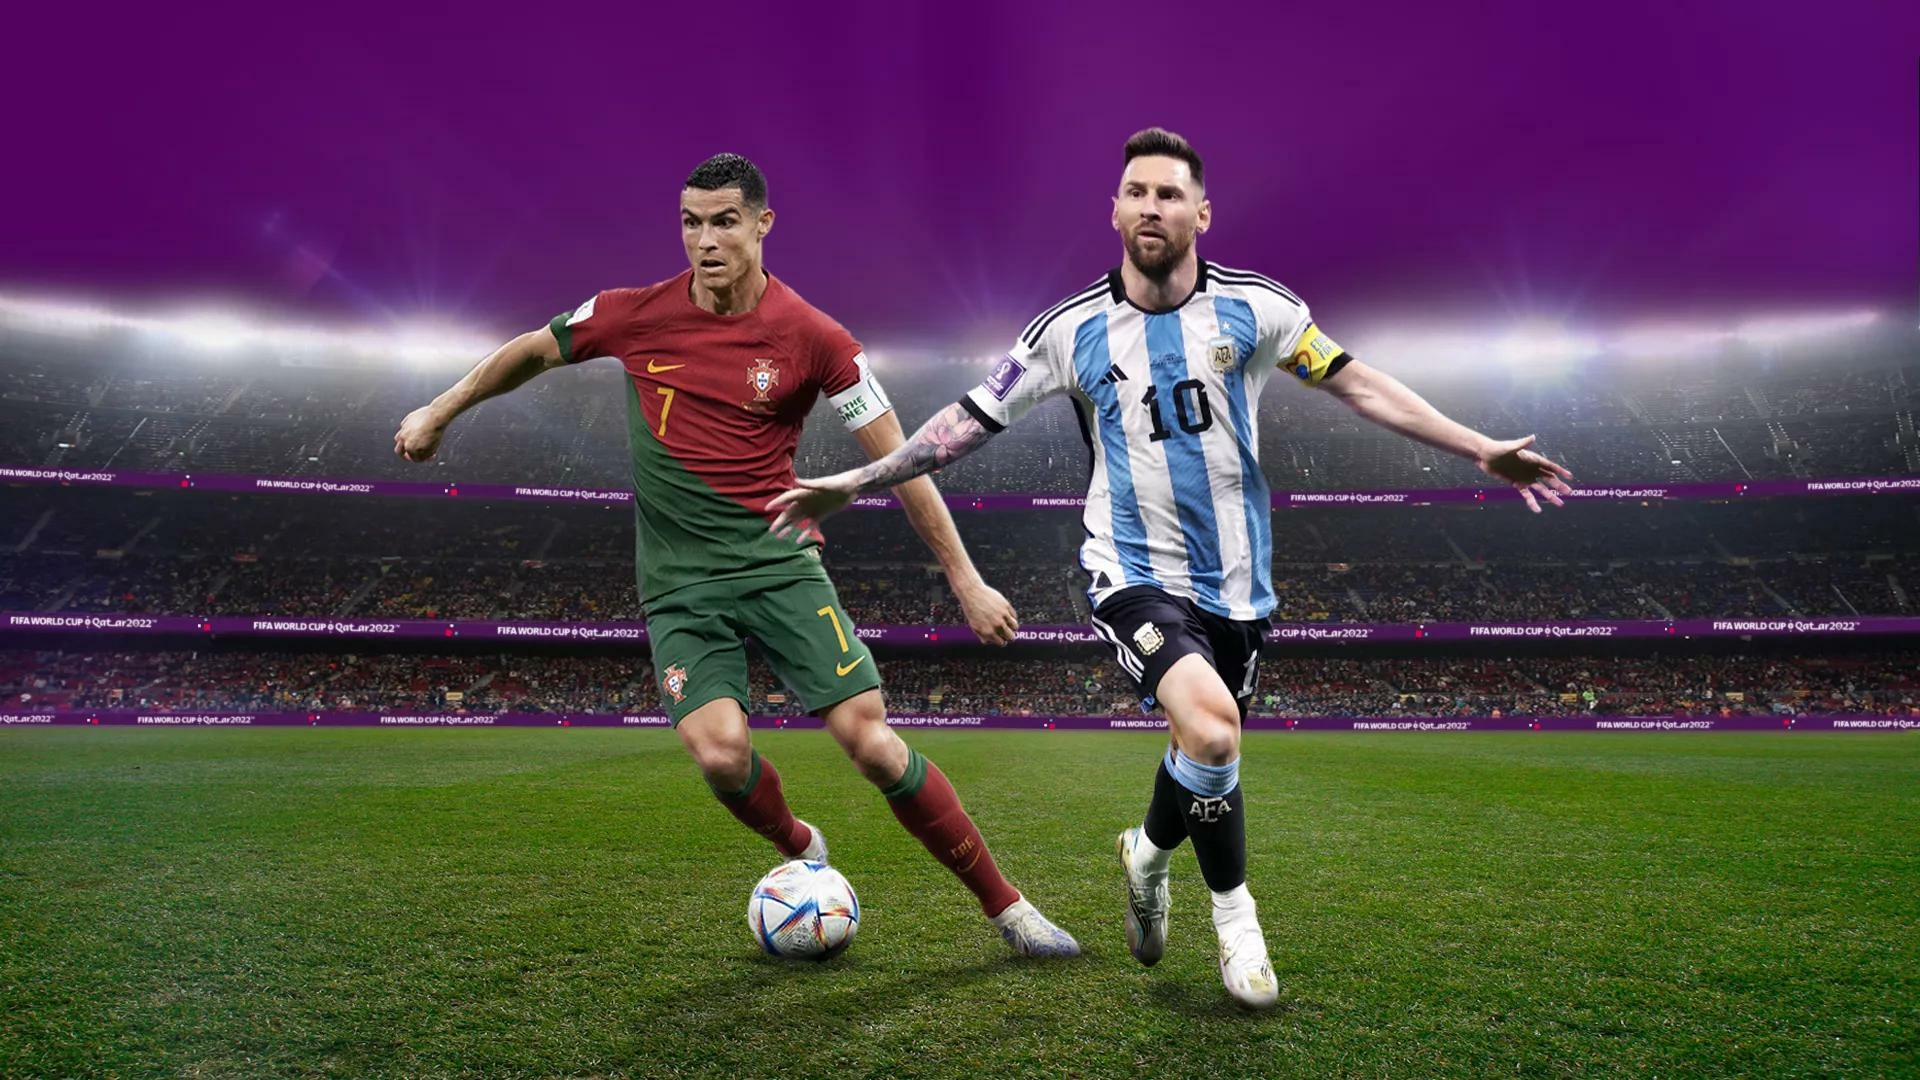 Ronaldo vs Messi FIFA World Cup 2022 Wallpaper, HD Sports 4K Wallpapers,  Images, Photos and Background - Wallpapers Den